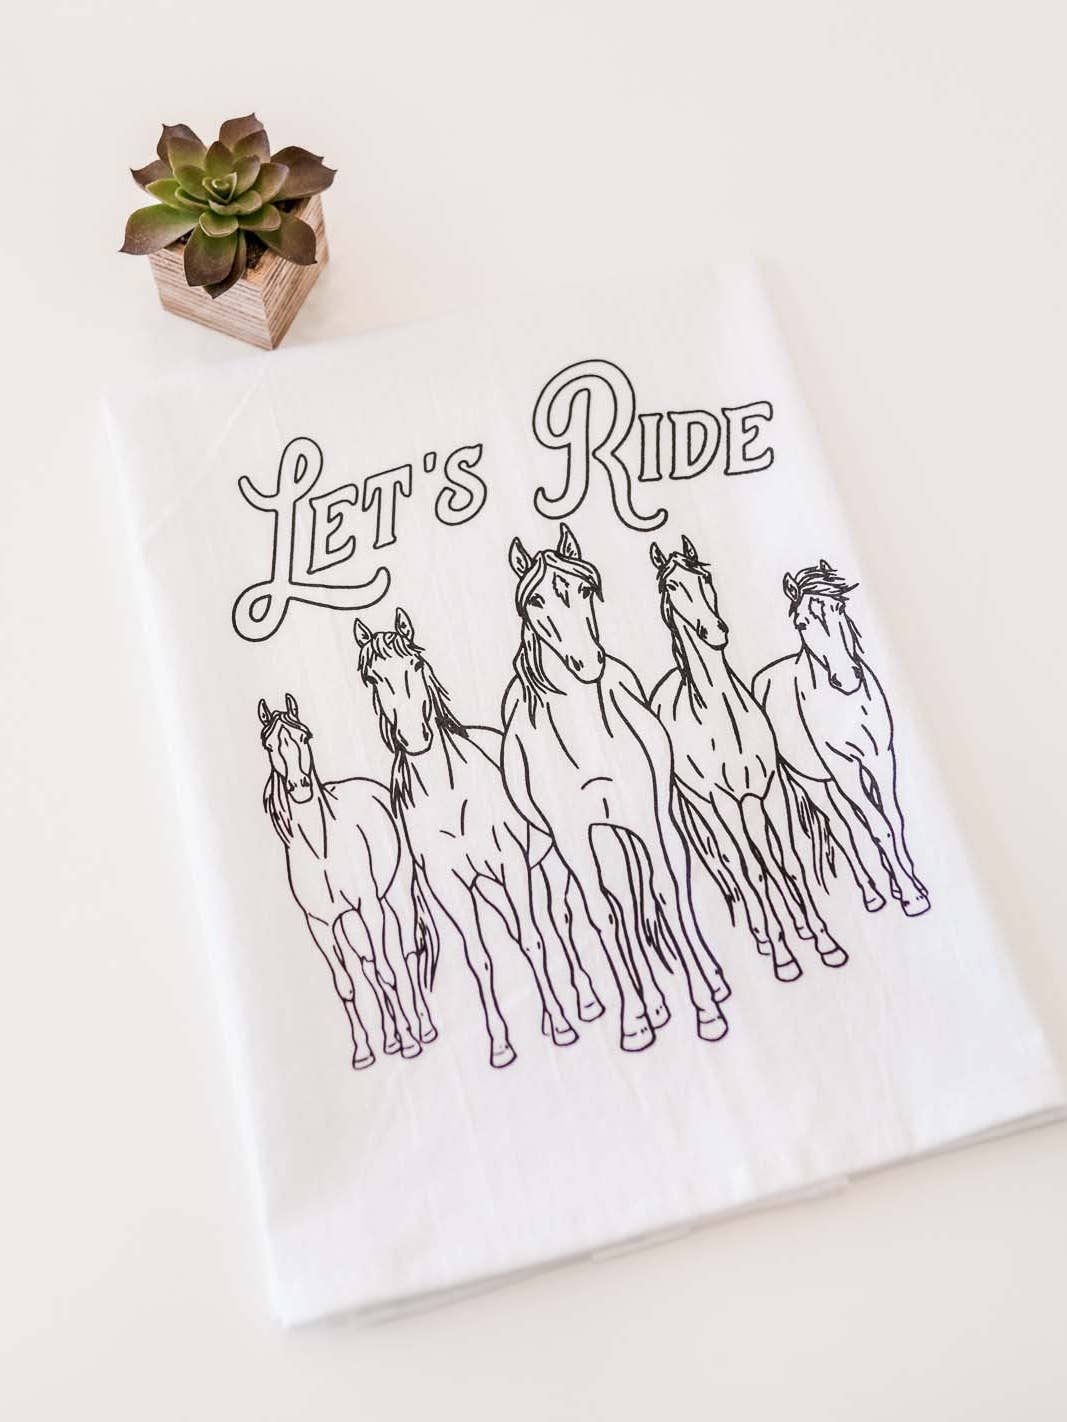 White tea towel with "let's ride" in black lettering. 5 wild horses in black underneath